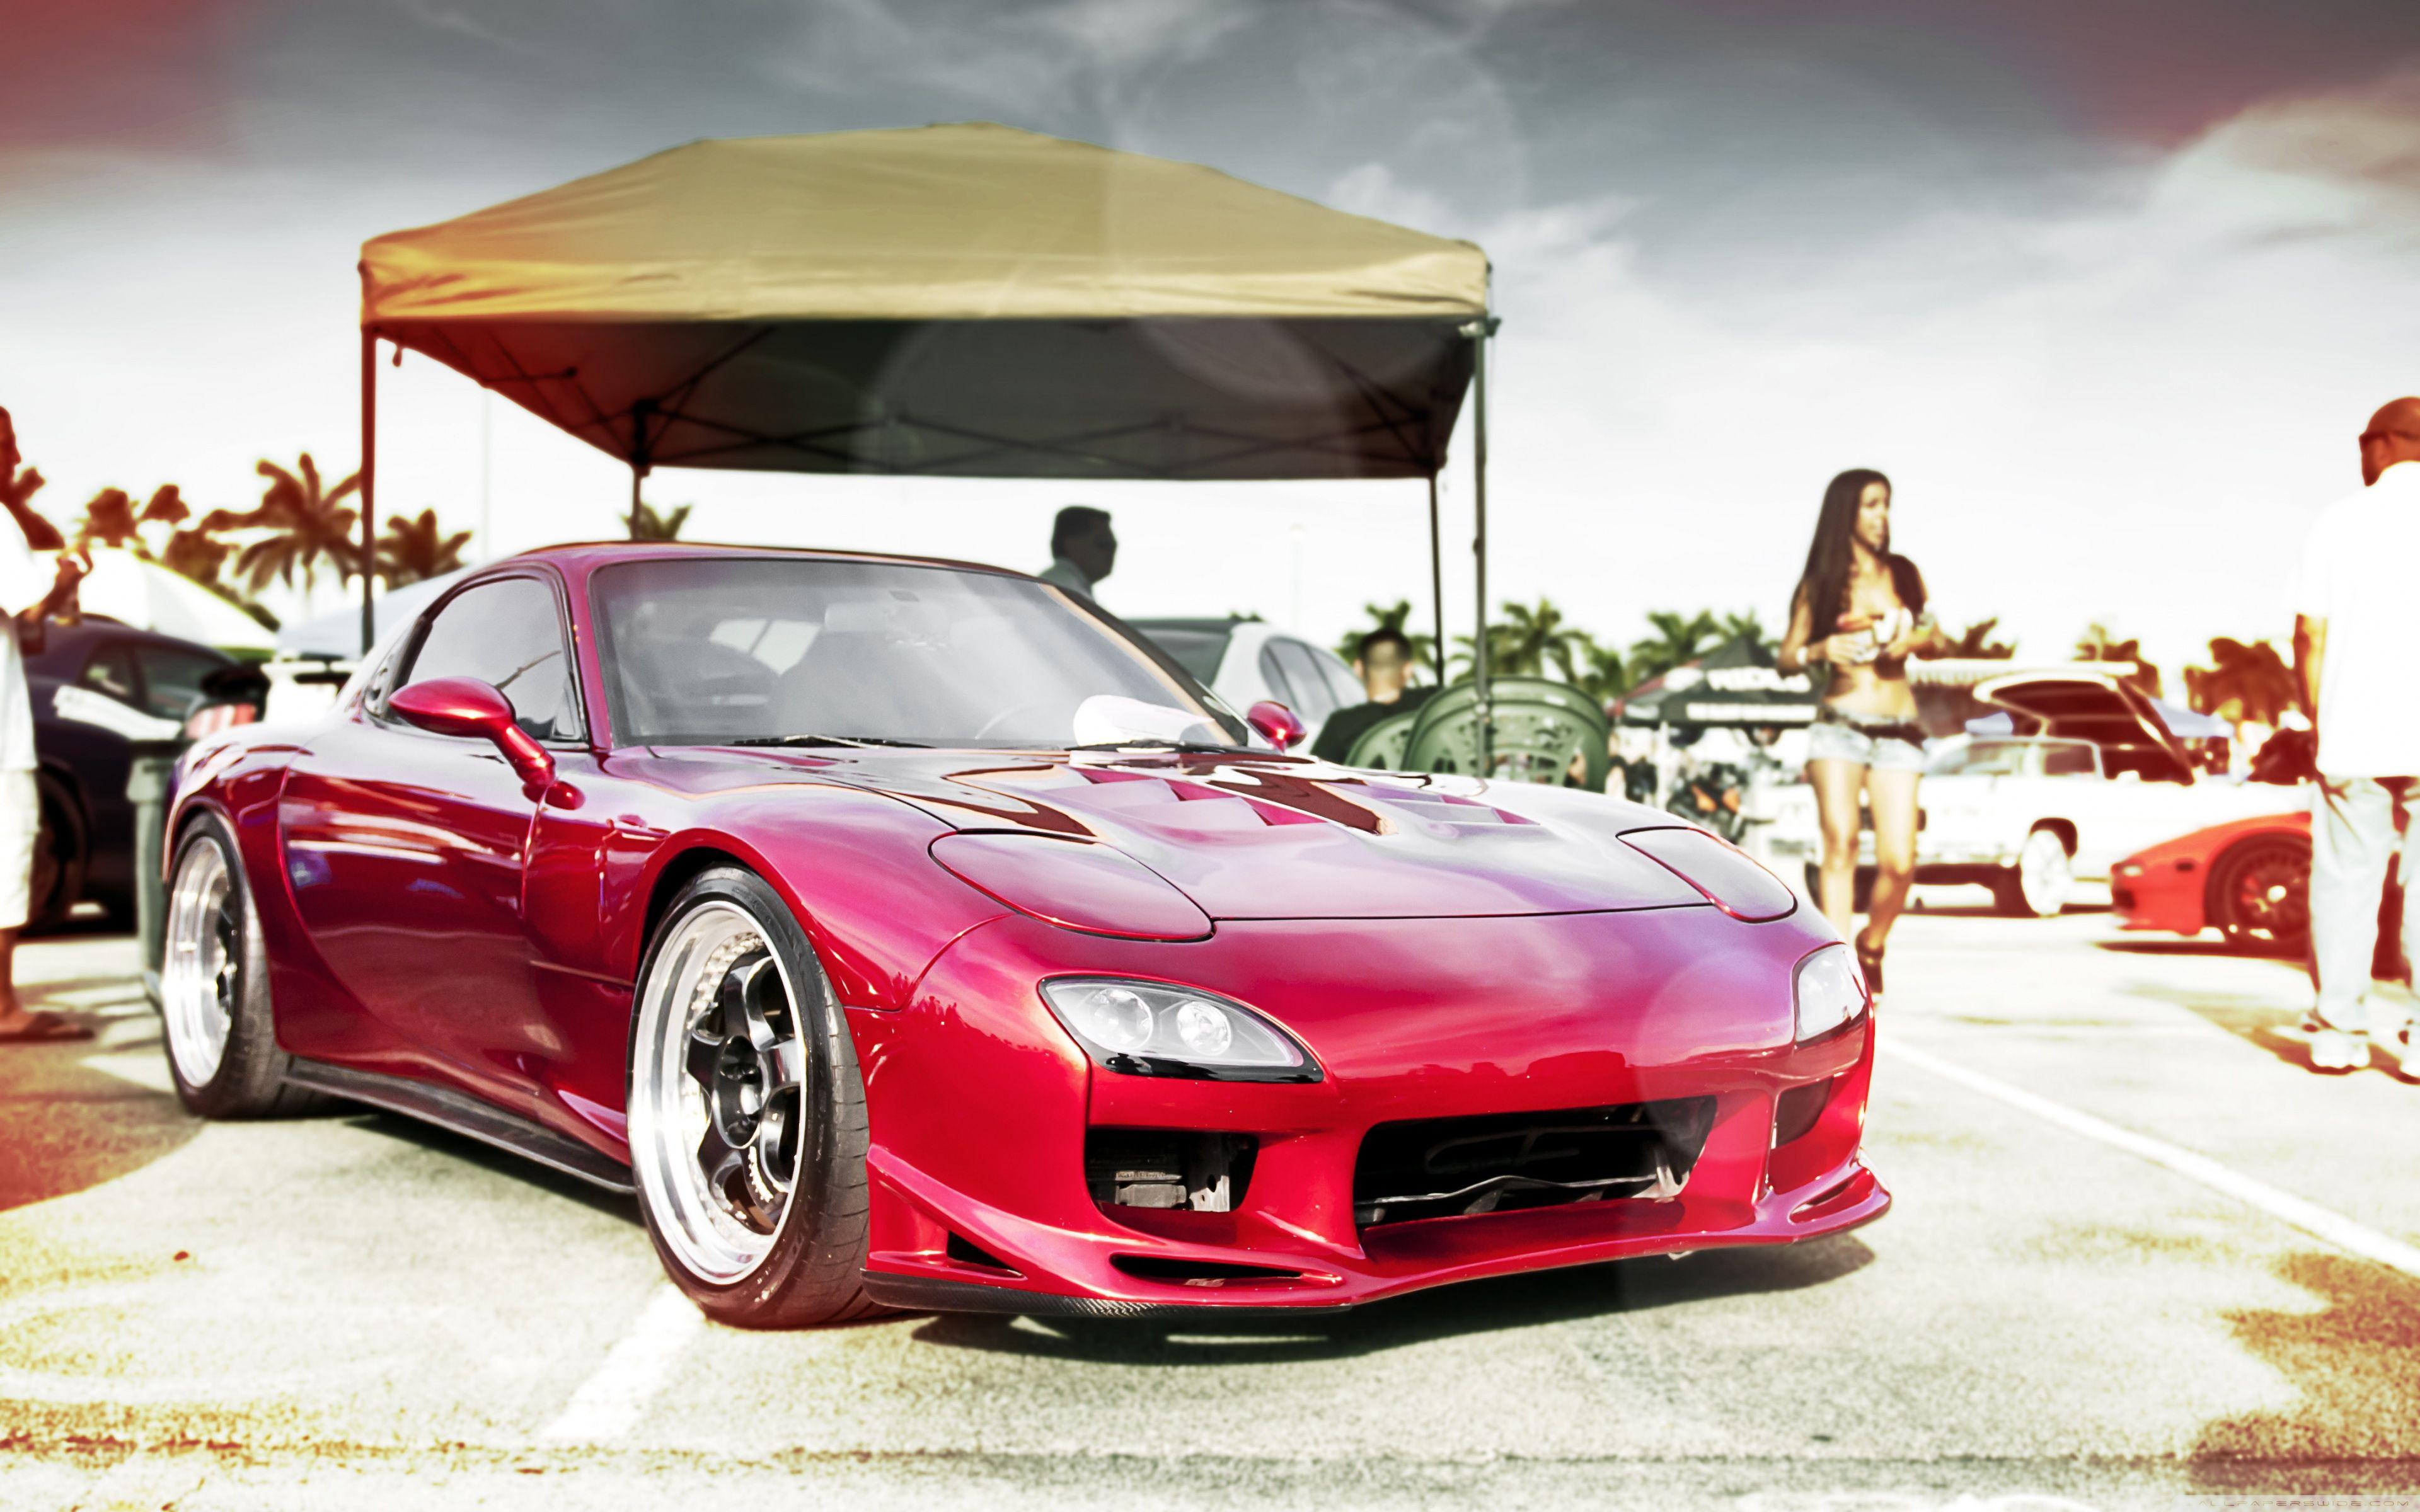 Rx7 4K Wallpapers - Top Free Rx7 4K Backgrounds ...